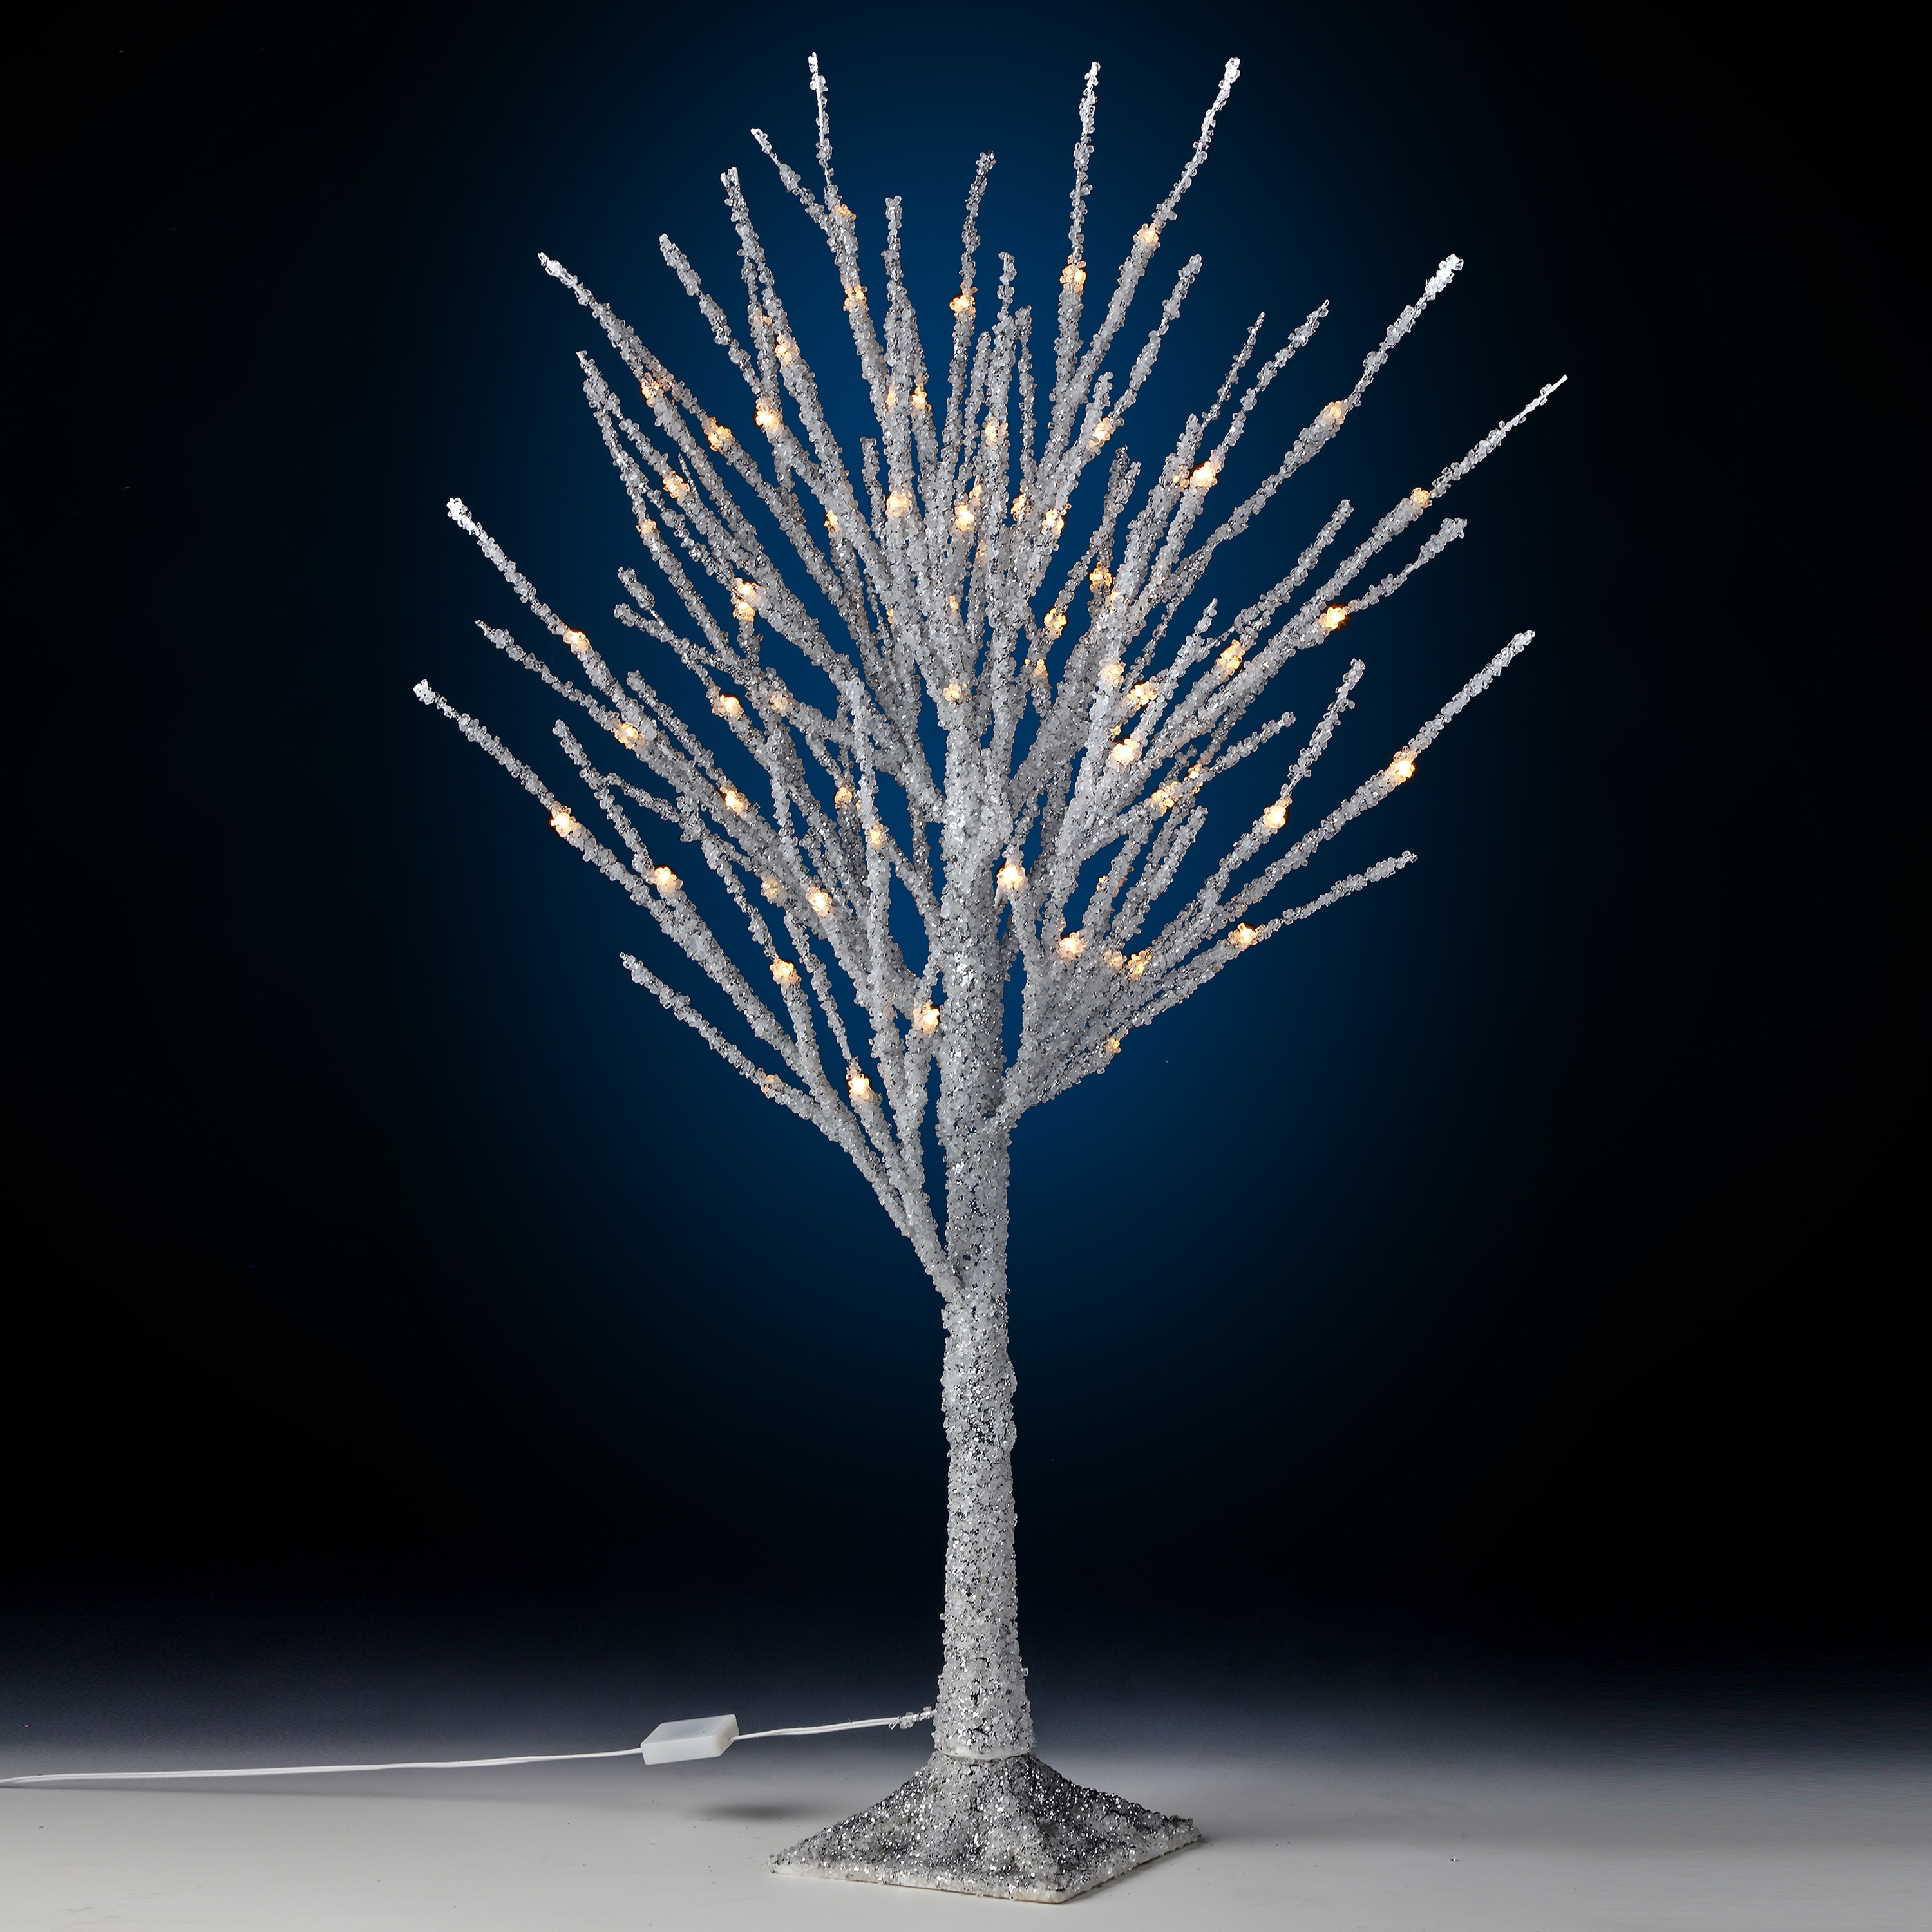 https://ak1.ostkcdn.com/images/products/is/images/direct/fcc7f9f278a529cdfc4da90e77b641a6a5baae7a/24%22-Metallic-Winter-Tree%2C-LED%2C-Battery-Timer-Remote%2C-Plug-in.jpg